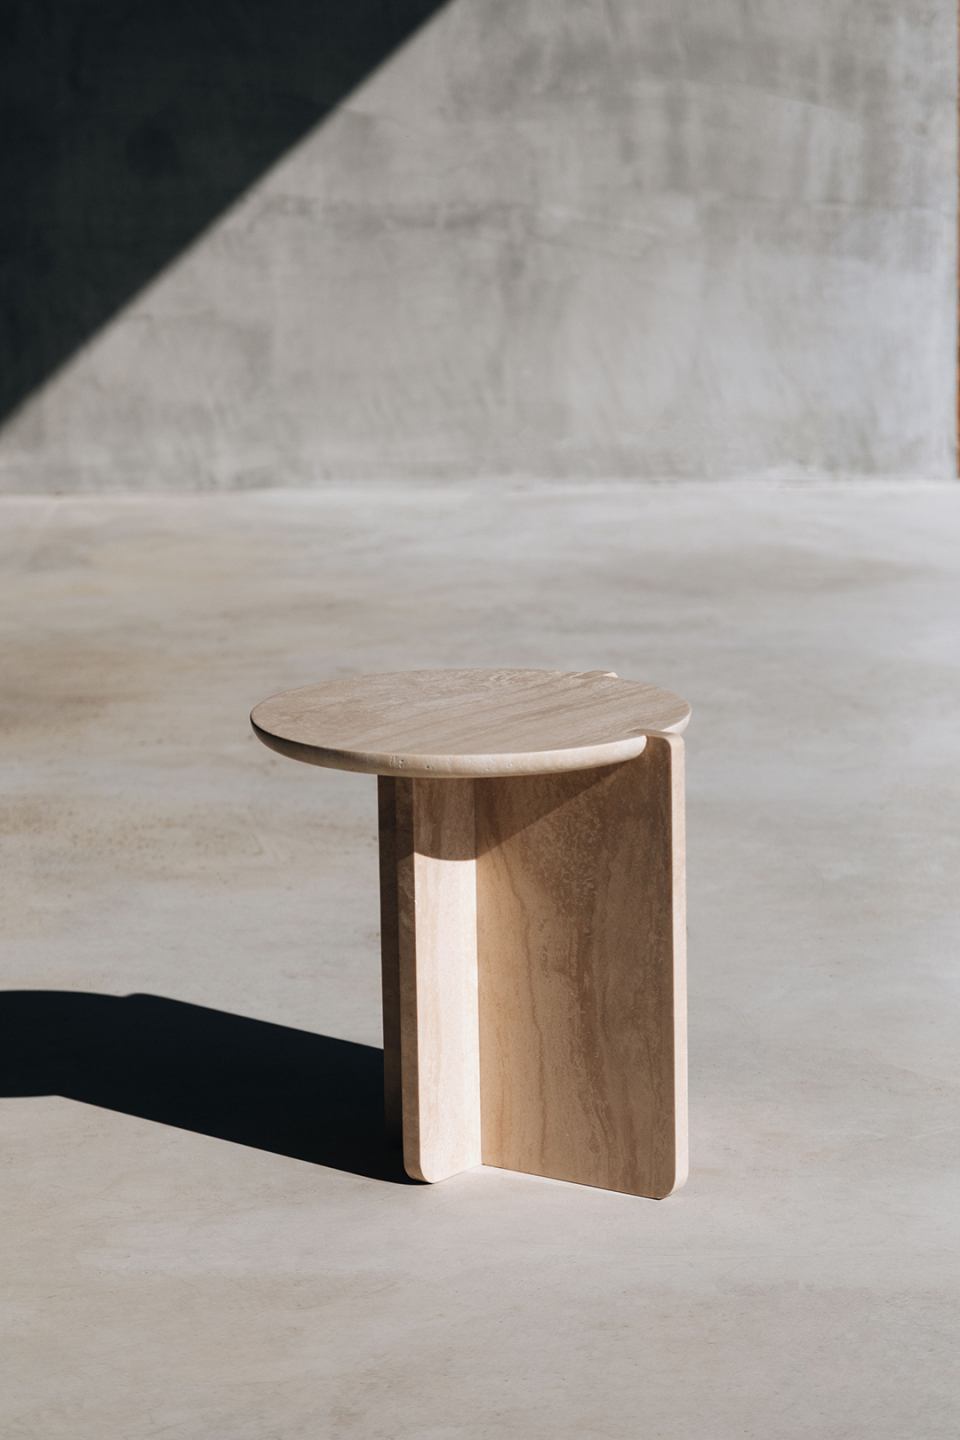 NOTCH TRAVERTINE image 0 | Marble Side Tables | MAAMI HOME 